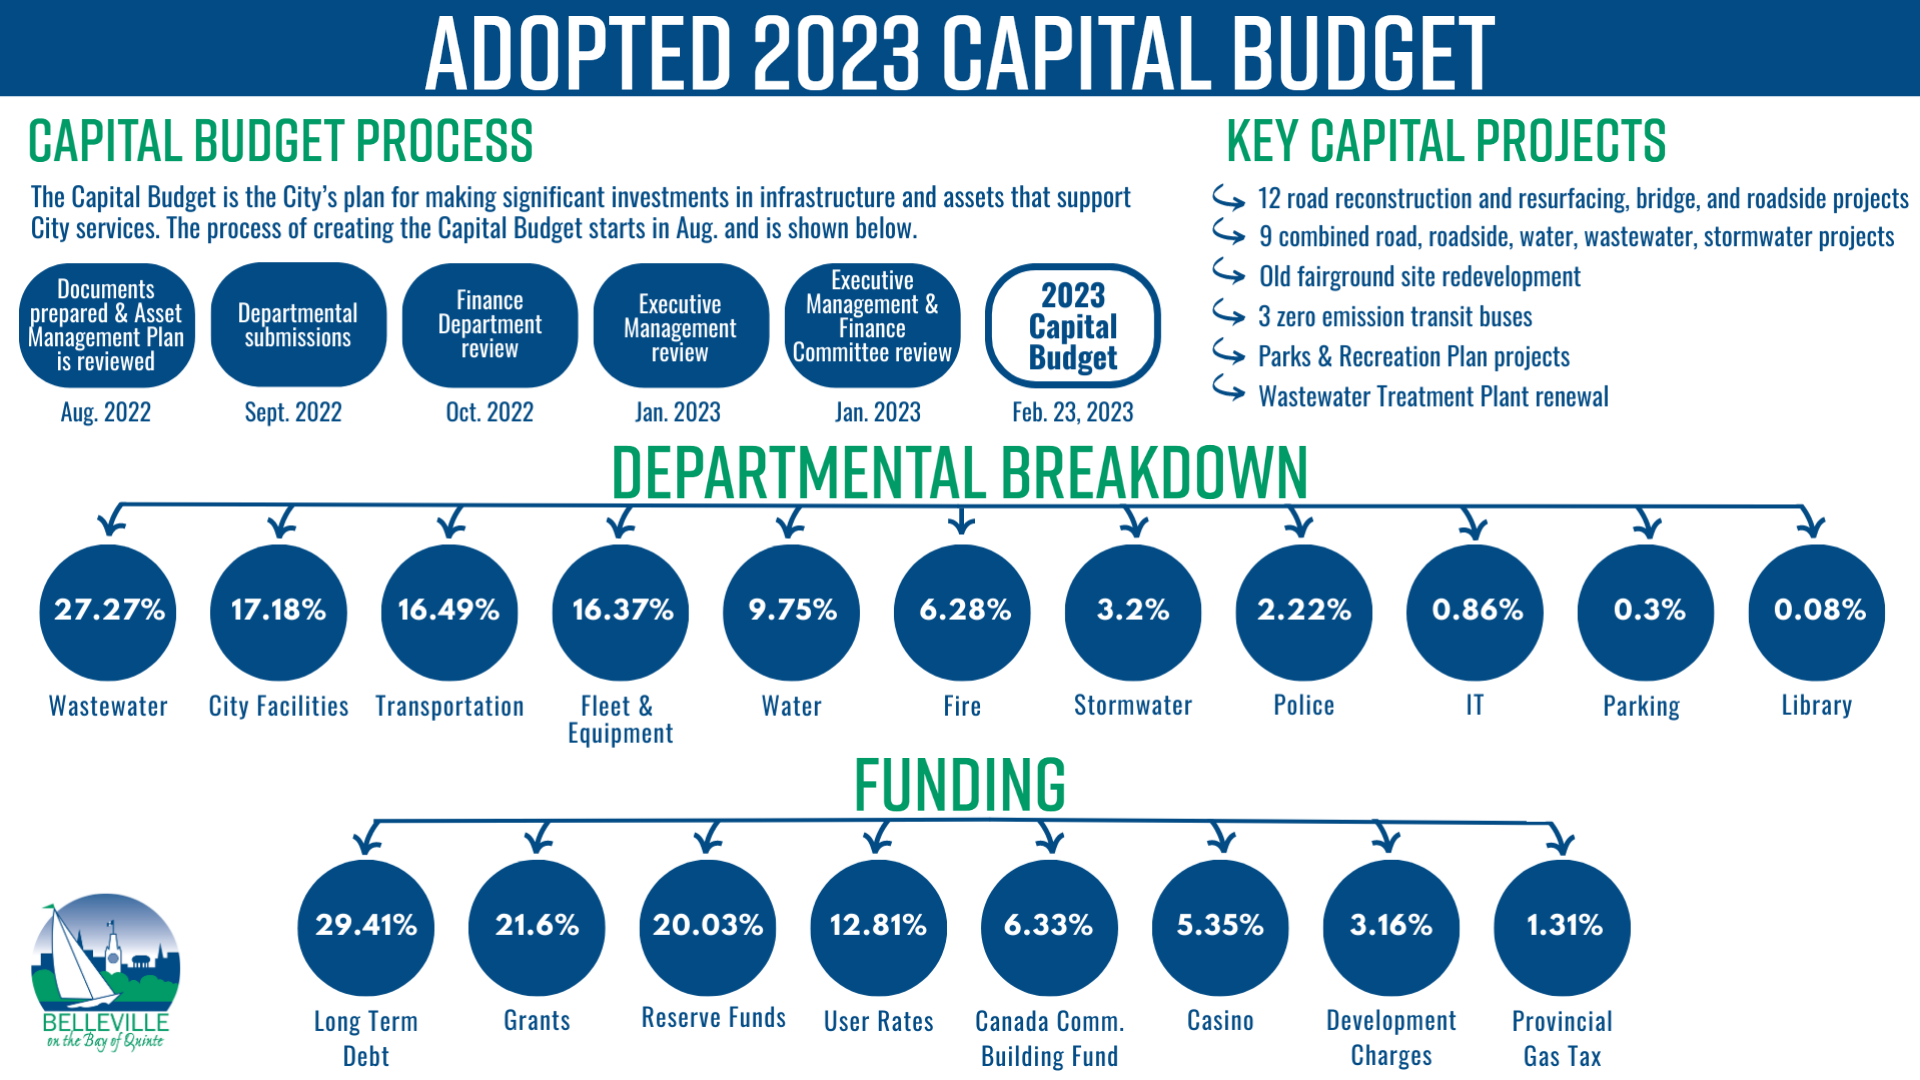 An Infographic displaying an overview of the Adopted 2023 Capital Budget. Section 1 Capital Budget Process: The Capital Budget is the City’s plan for making significant investments in infrastructure and assets that support City services. The process starts in August 2022 when the Documents are prepared, and the Asset Management Plan is reviewed. In Sept. 2022 departmental submissions are received. In Oct.2022 the Finance Department reviews the documents. In Jan. 2023 the executive management and Finance Committee review the Documents. On Feb 23. 2023 Council reviews the documents during the Capital Budget Meeting. Some key Capital Projects include 12 road reconstruction and resurfacing bridge and roadside projects, Old fairground site redevelopment, 9 combined road, roadside, water, wastewater, stormwater projects, 3 zero-emission transit buses, Parks & Recreation Plan projects, and the Wastewater Treatment Plant renewal. The departmental breakdown of the Capital Budget is 27.27% Wastewater, 17.18% City Facilities, 16.49% Fleet & Equipment, 9.75% Water, 6.28% Fire, 3.2% Stormwater, 2.22% Police, 0.86% IT, 0.3% Parking, 0.08% Library. The Funding breakdown of the Capital Budget is 29.41% Long Term debt, 21.6% Grants, 20.03% Reserve Funds, 12.81% User Rates, 6.33% Canada Comm. Building Fund, 5.35% Casino, 3.16% Developmental Charges, 1.31% Provincial Gas Tax.